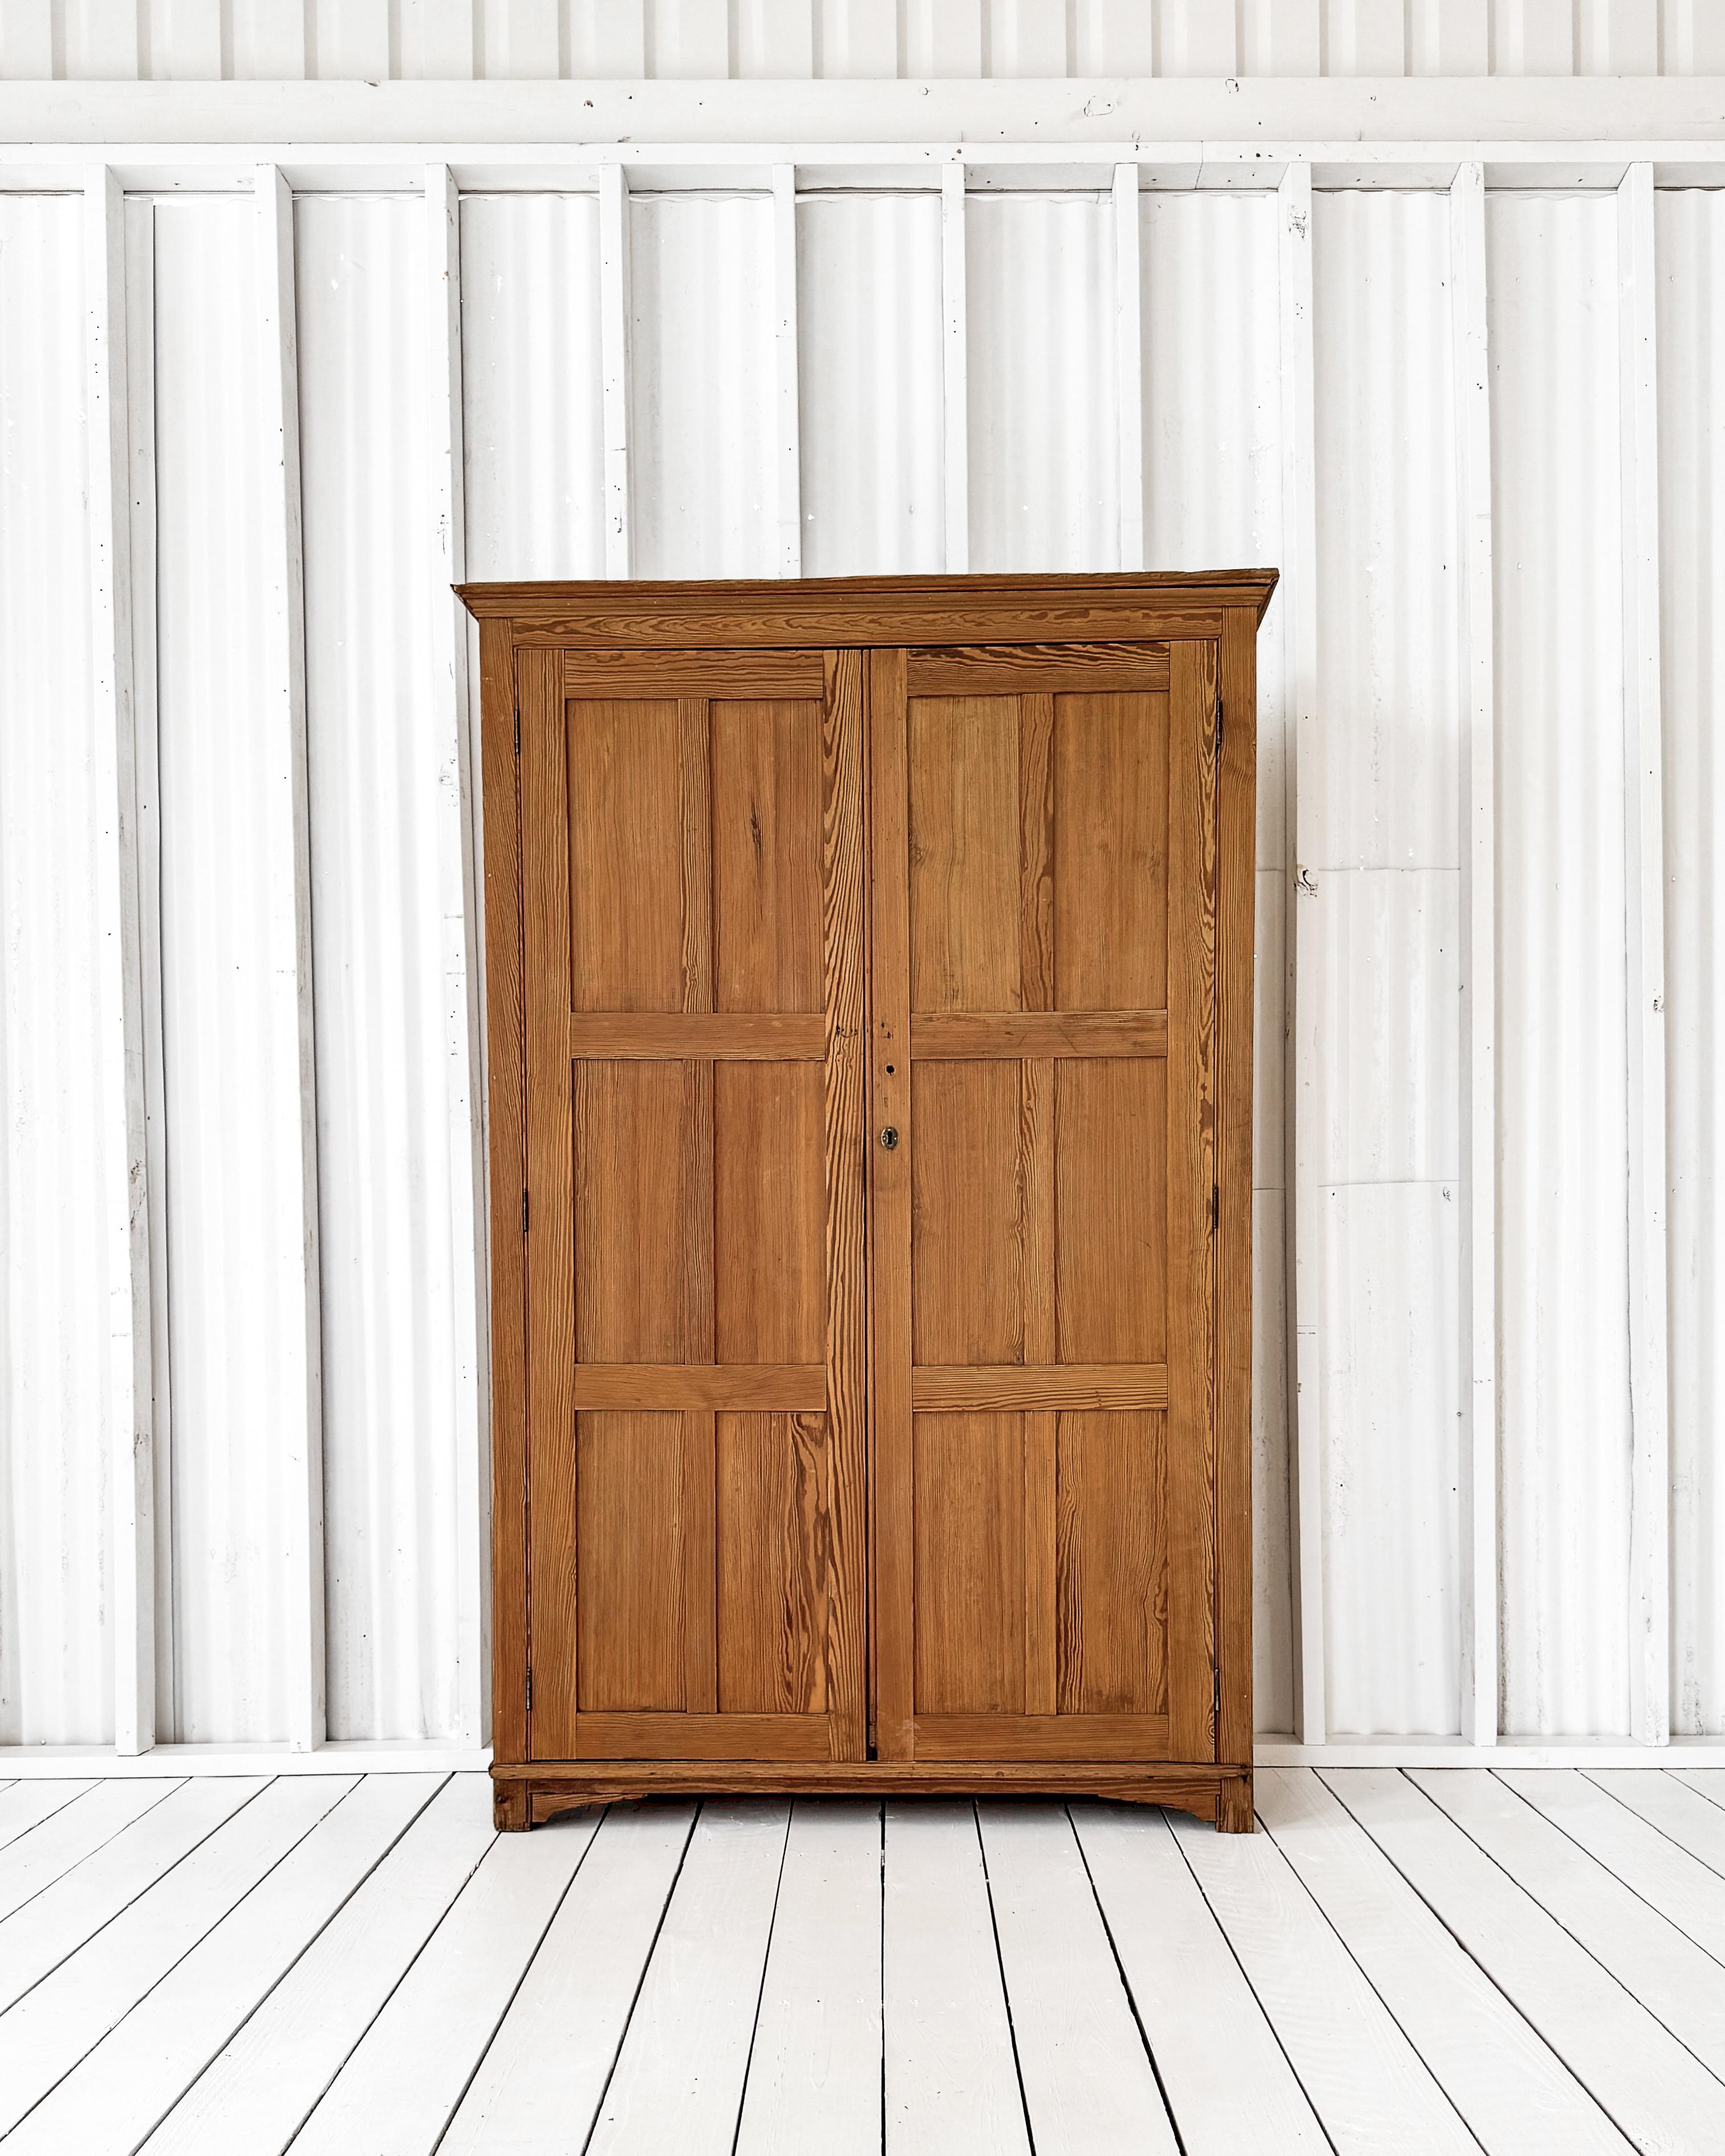 Once built into an English scullery for extra storage, this handsome cupboard is now a standalone piece guaranteed to keep your home clutter-free. Having an overall straightforward design, the cupboard is dressed up with crown molding and bracket